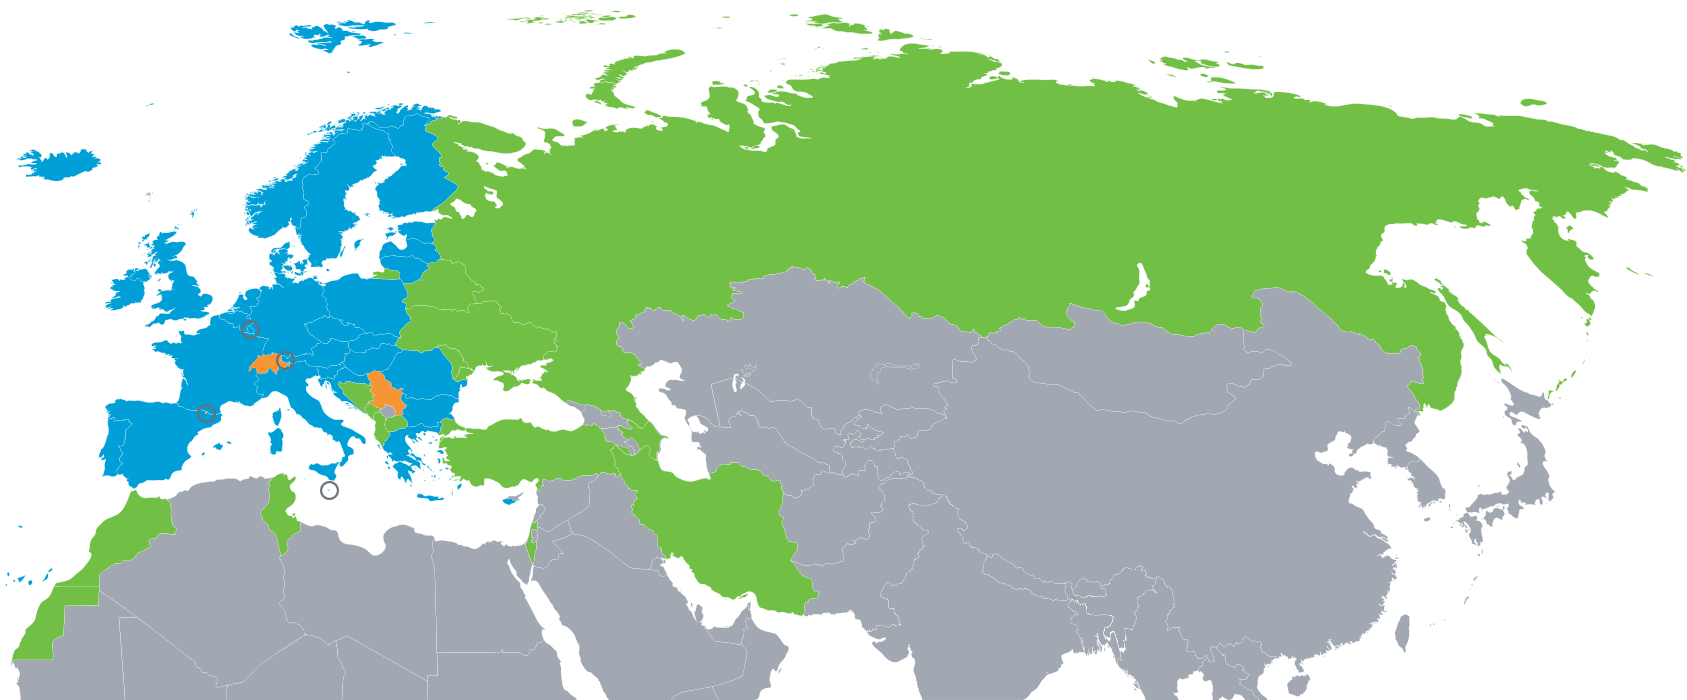 Green Card system map